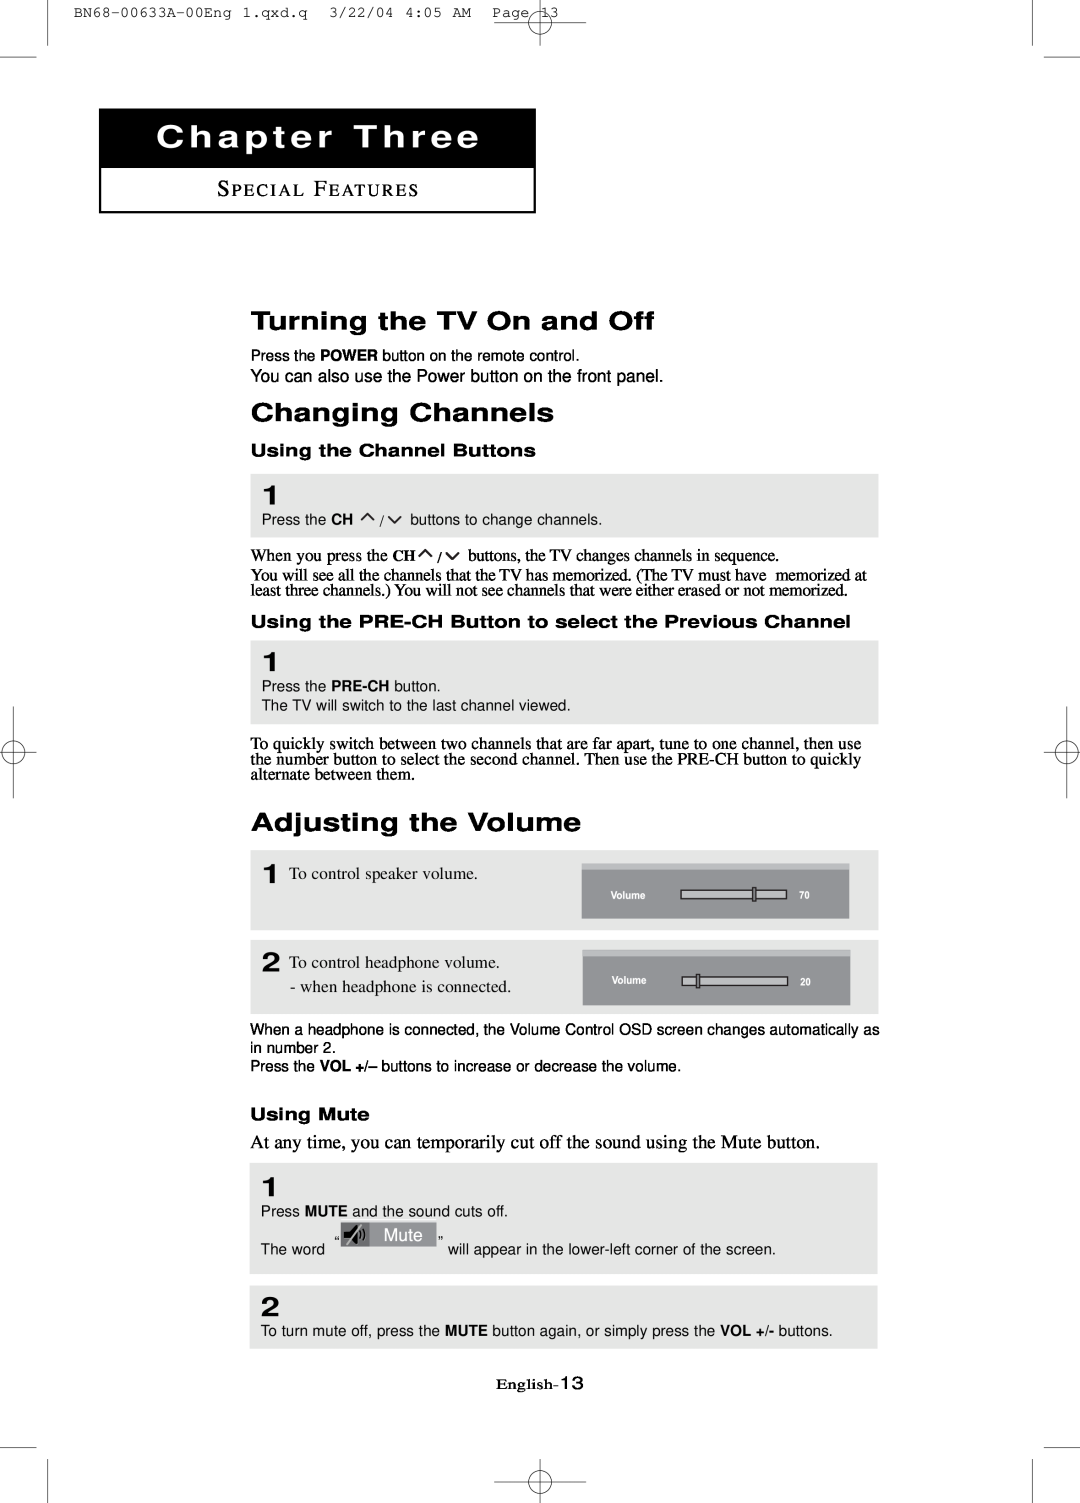 Samsung LT-P 1545, LT-P 1745 Chapter Three, Turning the TV On and Off, Changing Channels, Adjusting the Volume, Using Mute 